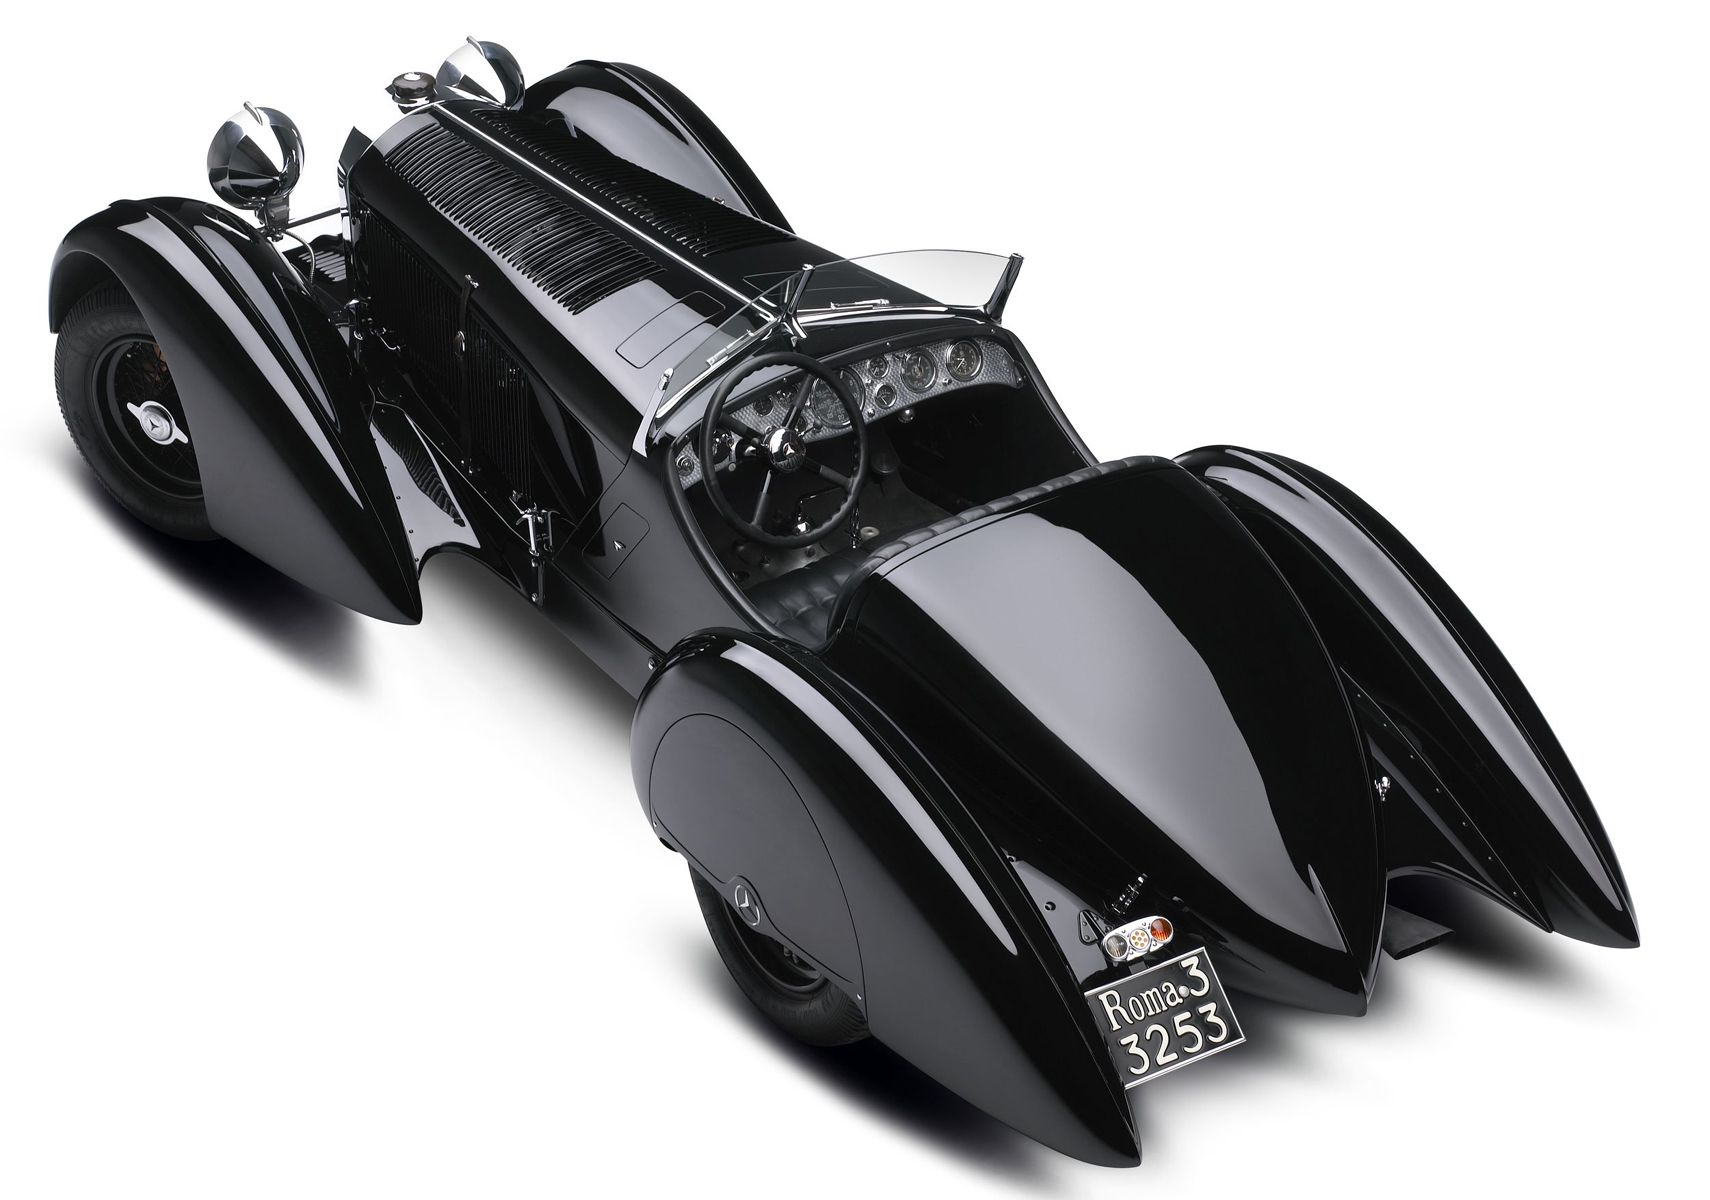 Ralph Lauren' 1930 Mercedes SSK, Called Count Trossi, Was The Best Of Show Winner At Two Concours D’elegance Shows One In 1993 And The Other In 2007